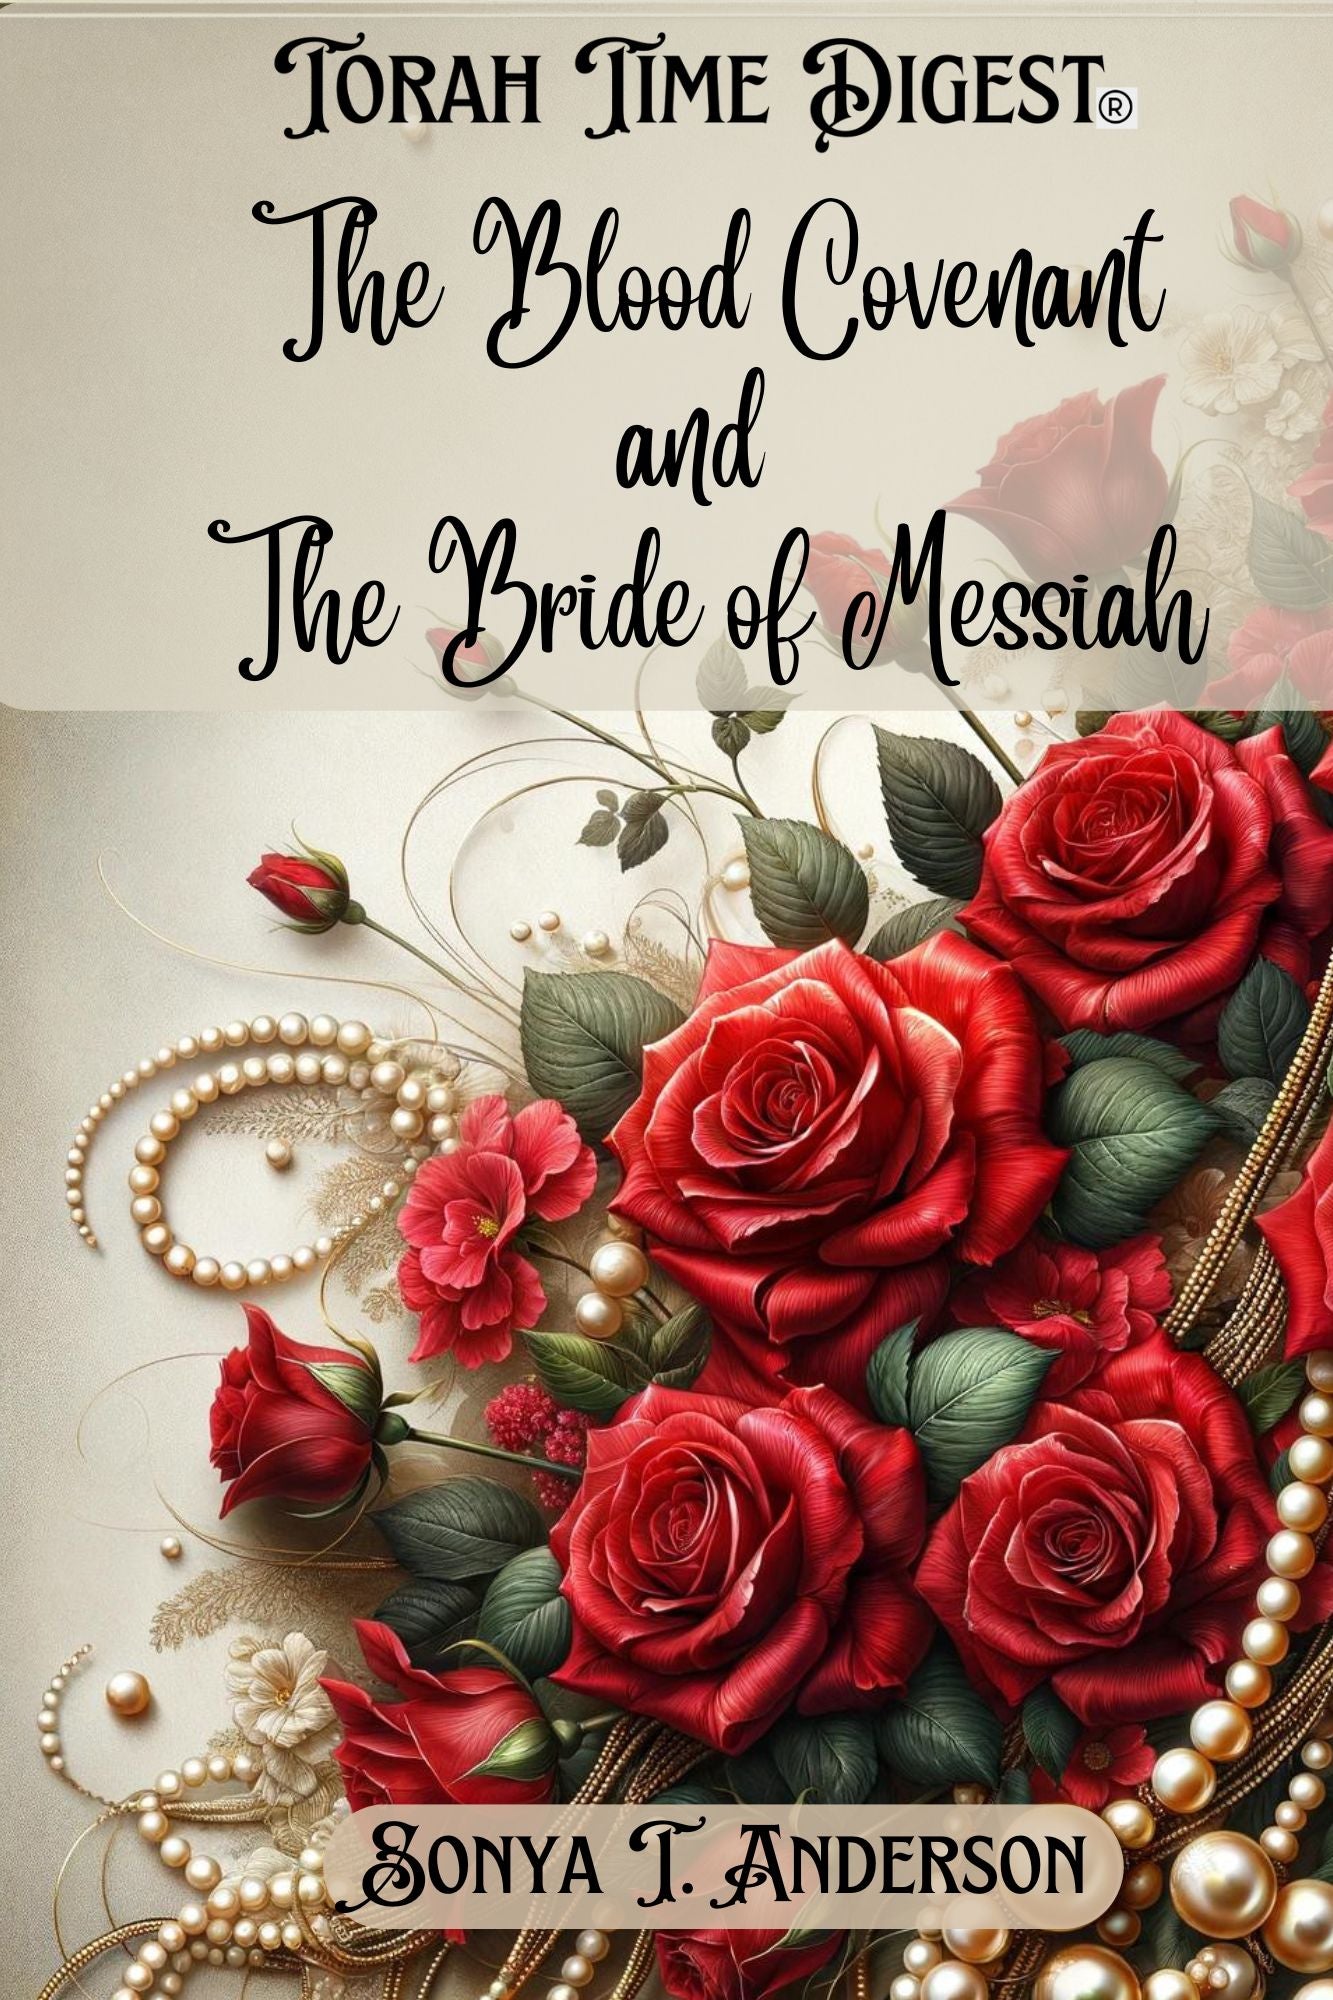 Torah Time Digest: The Blood Covenant and the Bride of Messiah